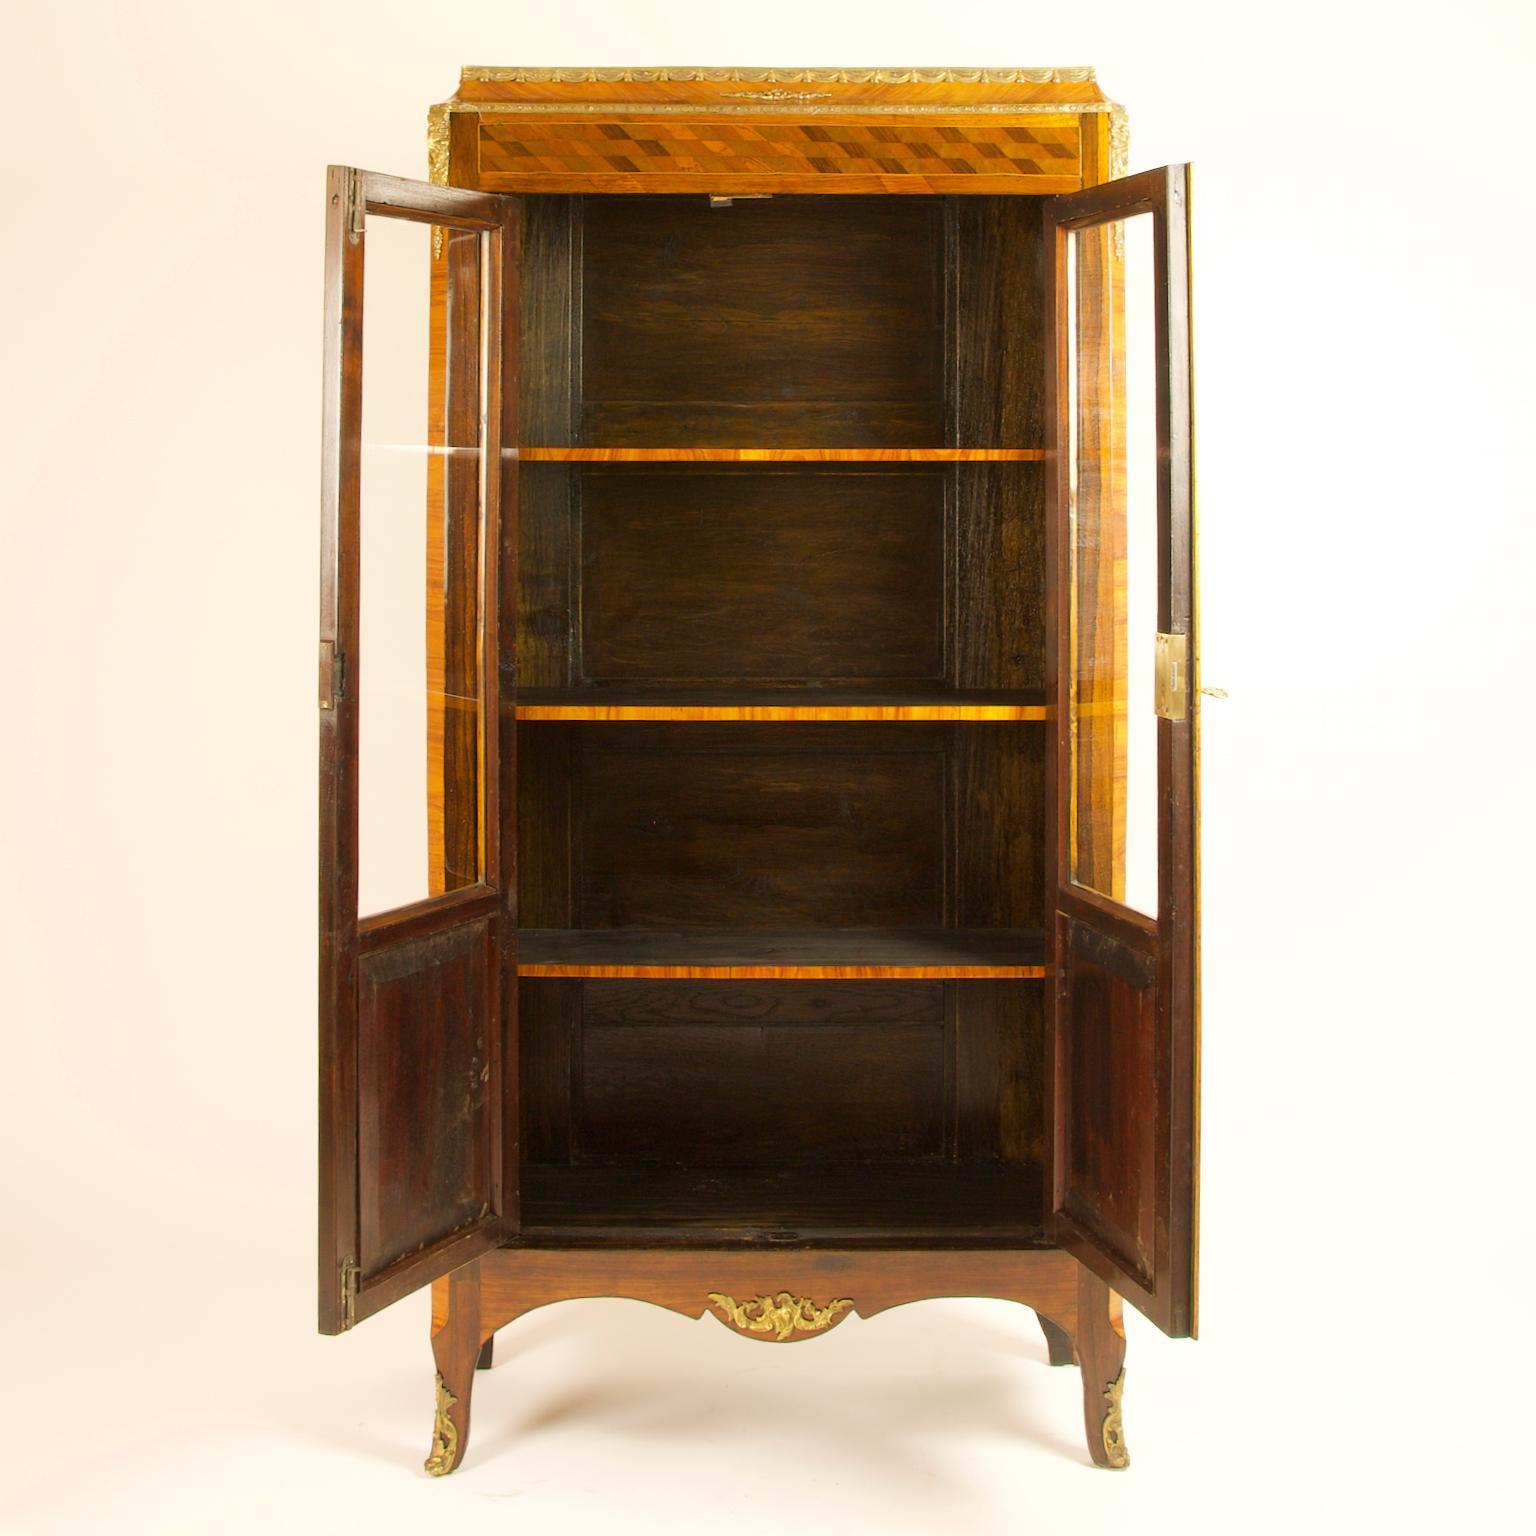 French 18th century Louis XV Transition period cube marquetry vitrine showcase or library

A fine small 18th century Louis XV/Transitional period vitrine or library standing on four short cabriole legs with gilt bronze Louis XV sabots and a shaped